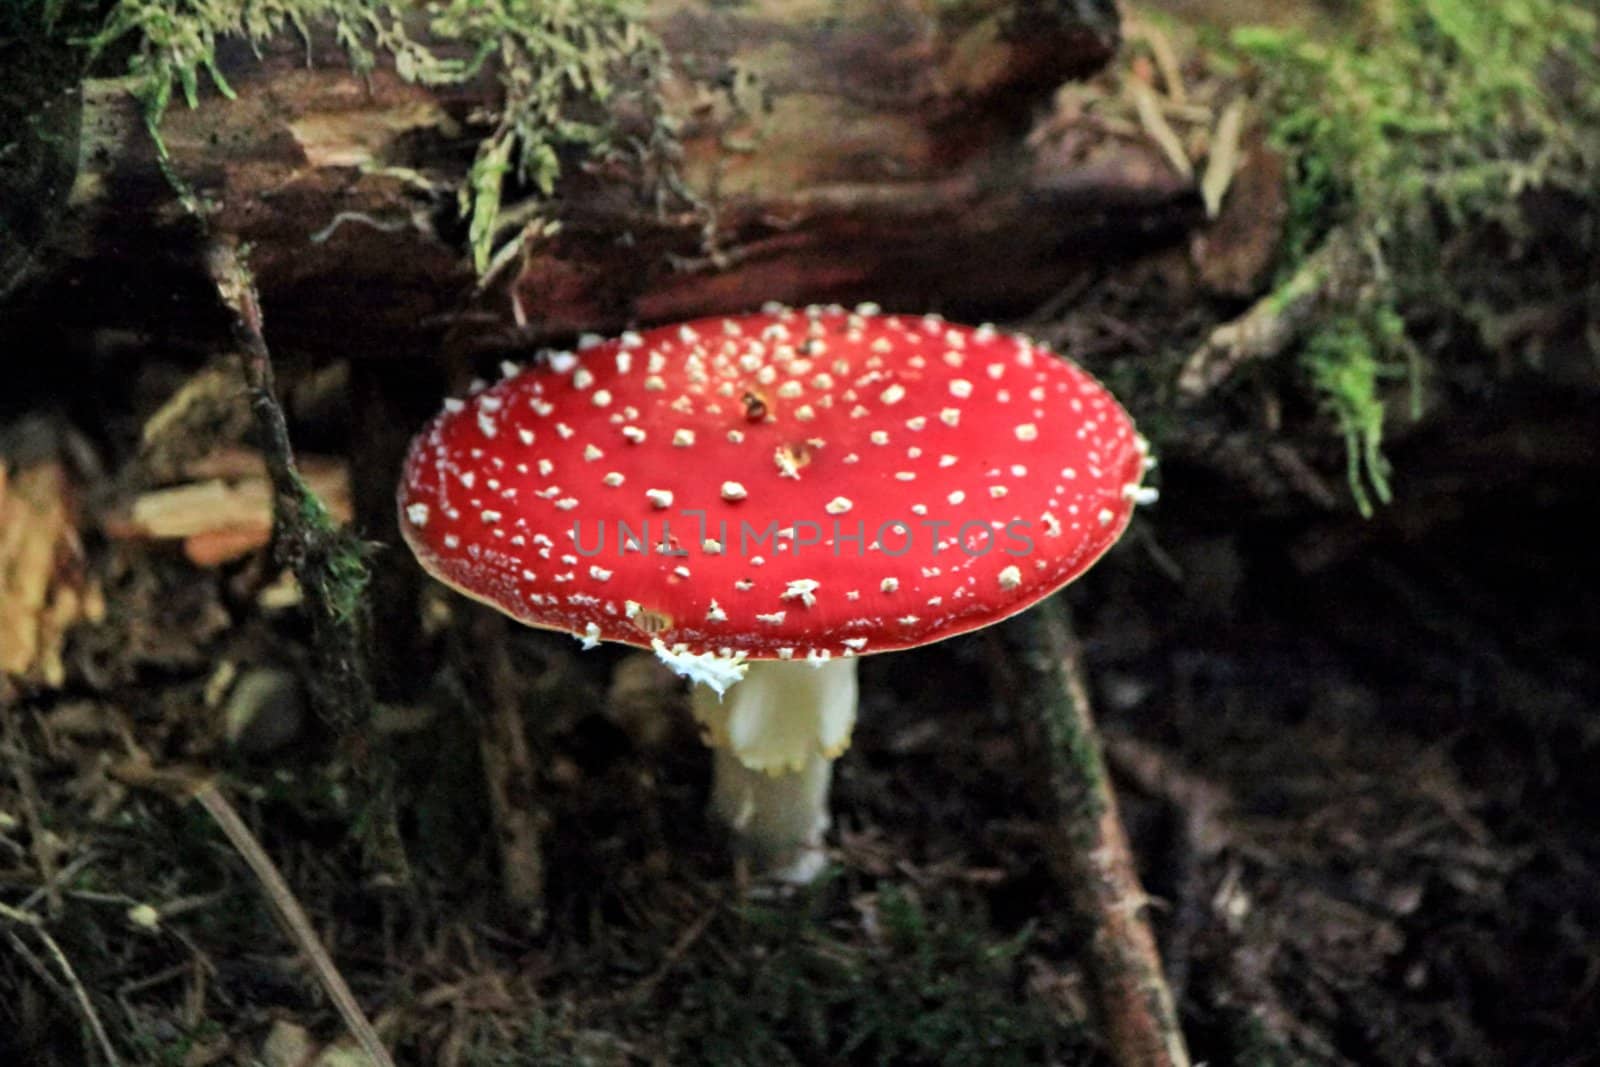 Red mushroom (Amanita Muscaria also known as Fly Ageric or Fly Amanita) in autumn forest